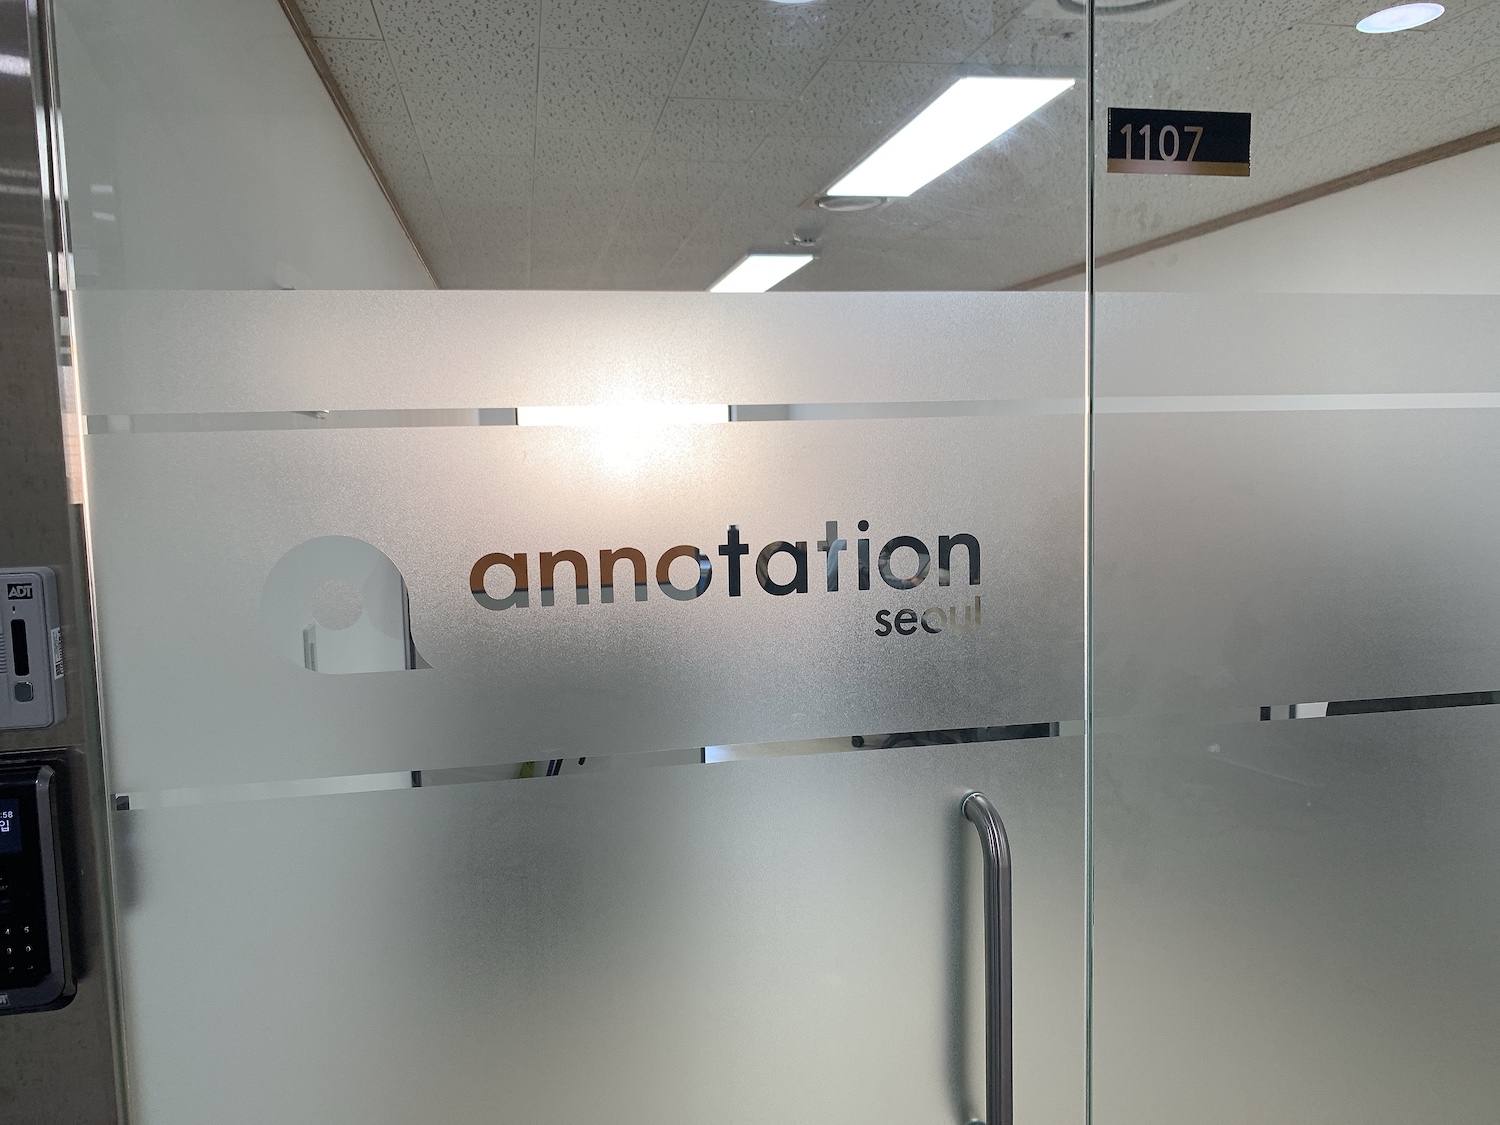 annotation-office-3